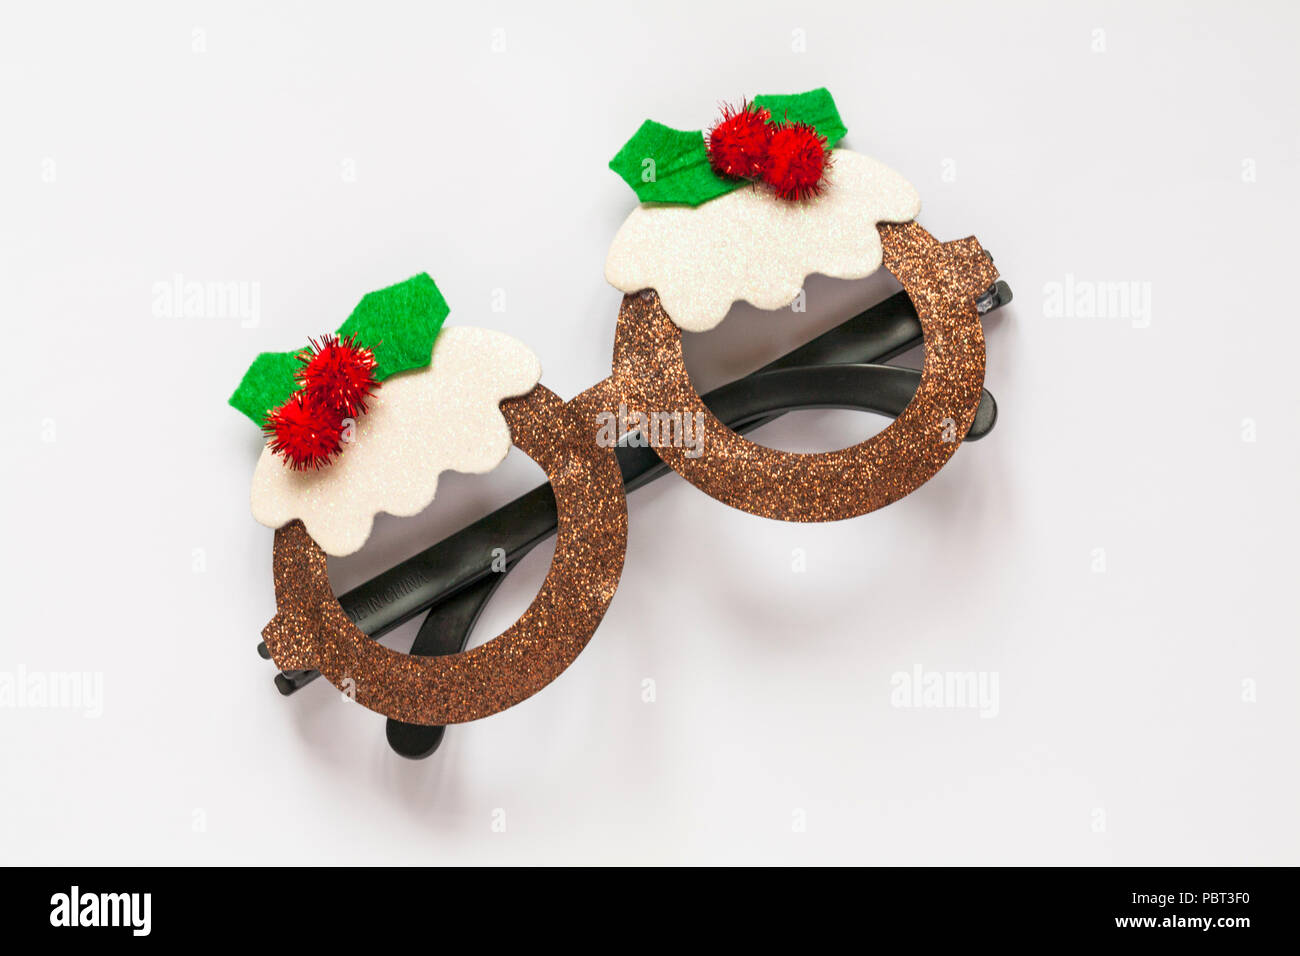 Novelty Christmas Pudding sparkly glasses for Christmas isolated on white background Stock Photo